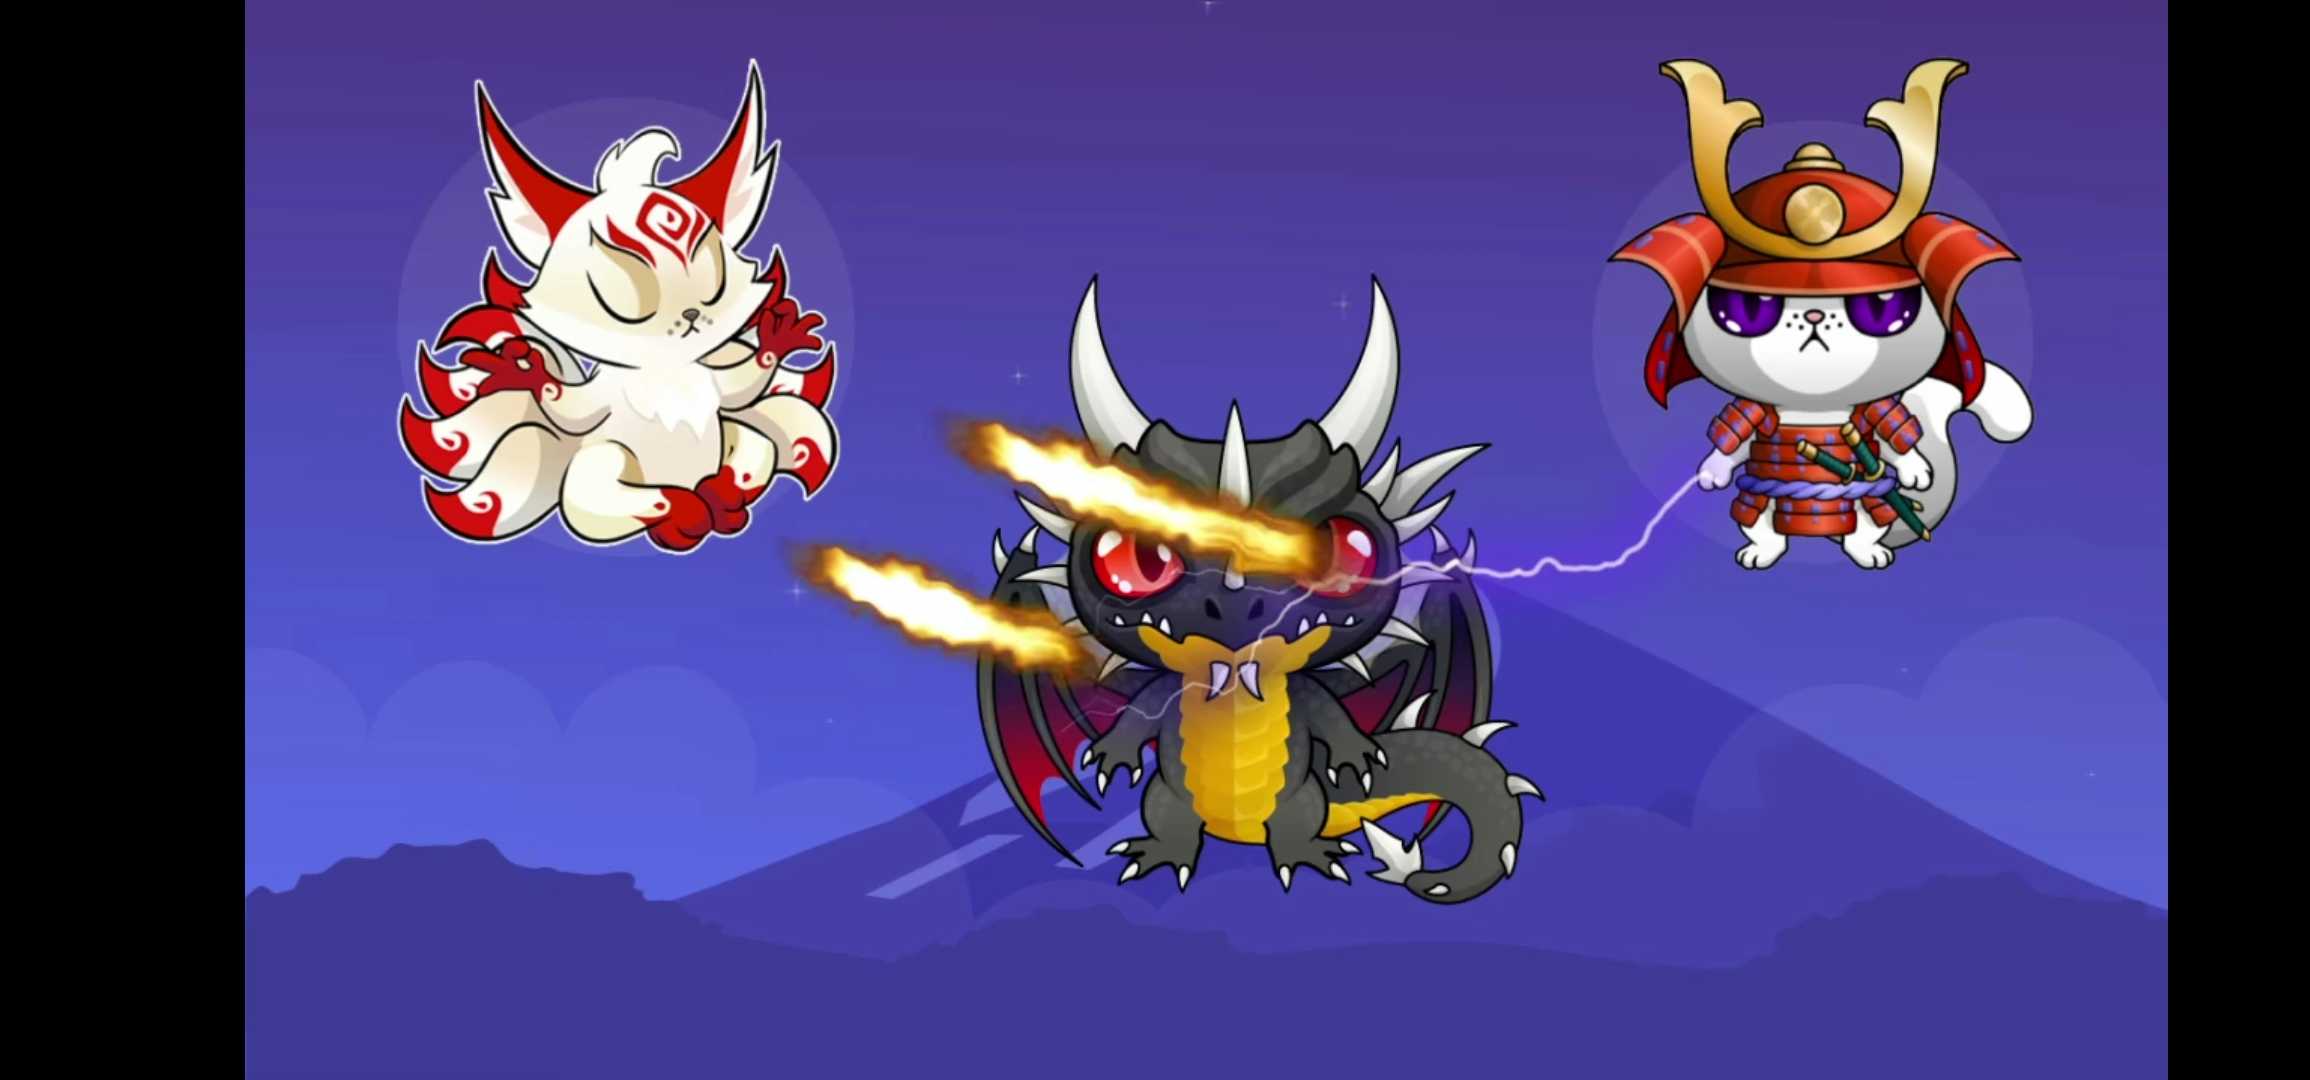 game image from Blockchain Cuties